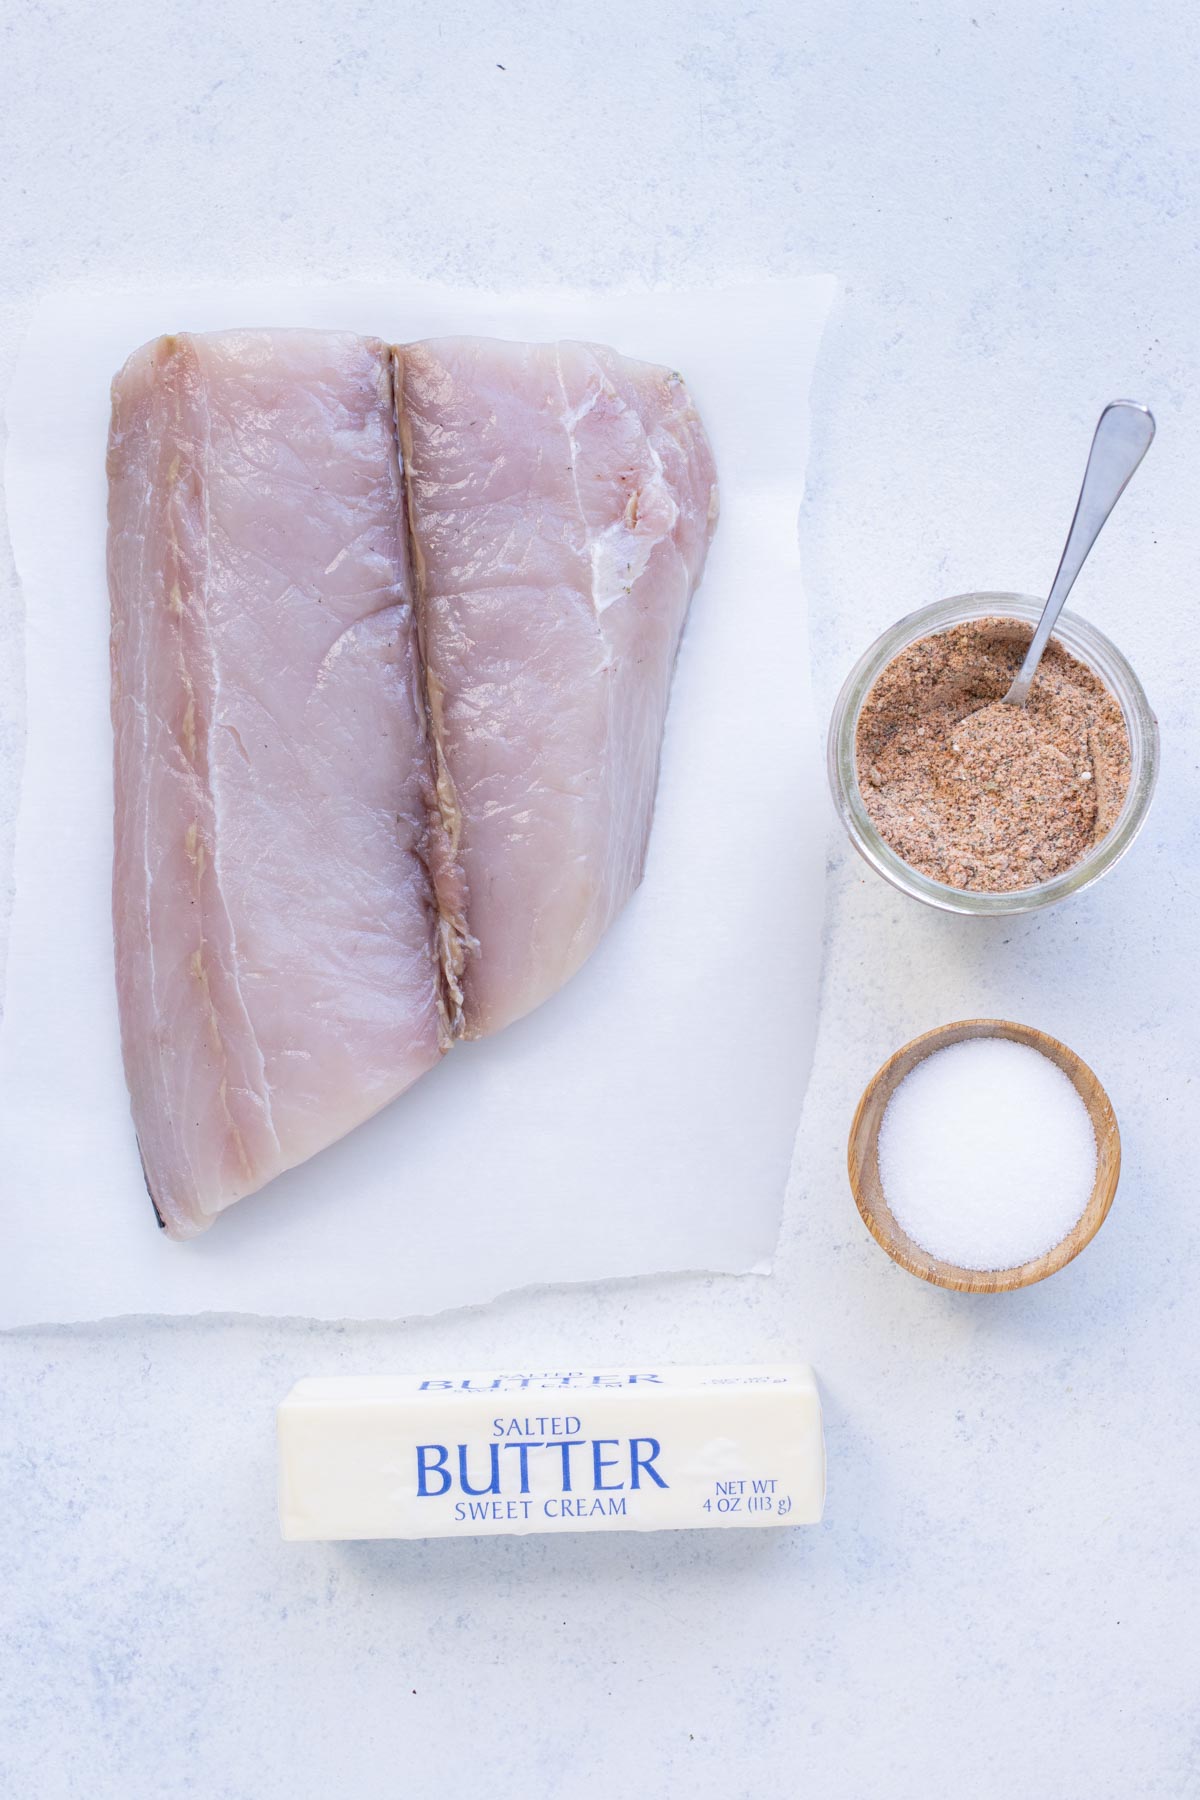 Mahi mahi, blackened seasoning, butter, and salt are the ingredients for this recipe.